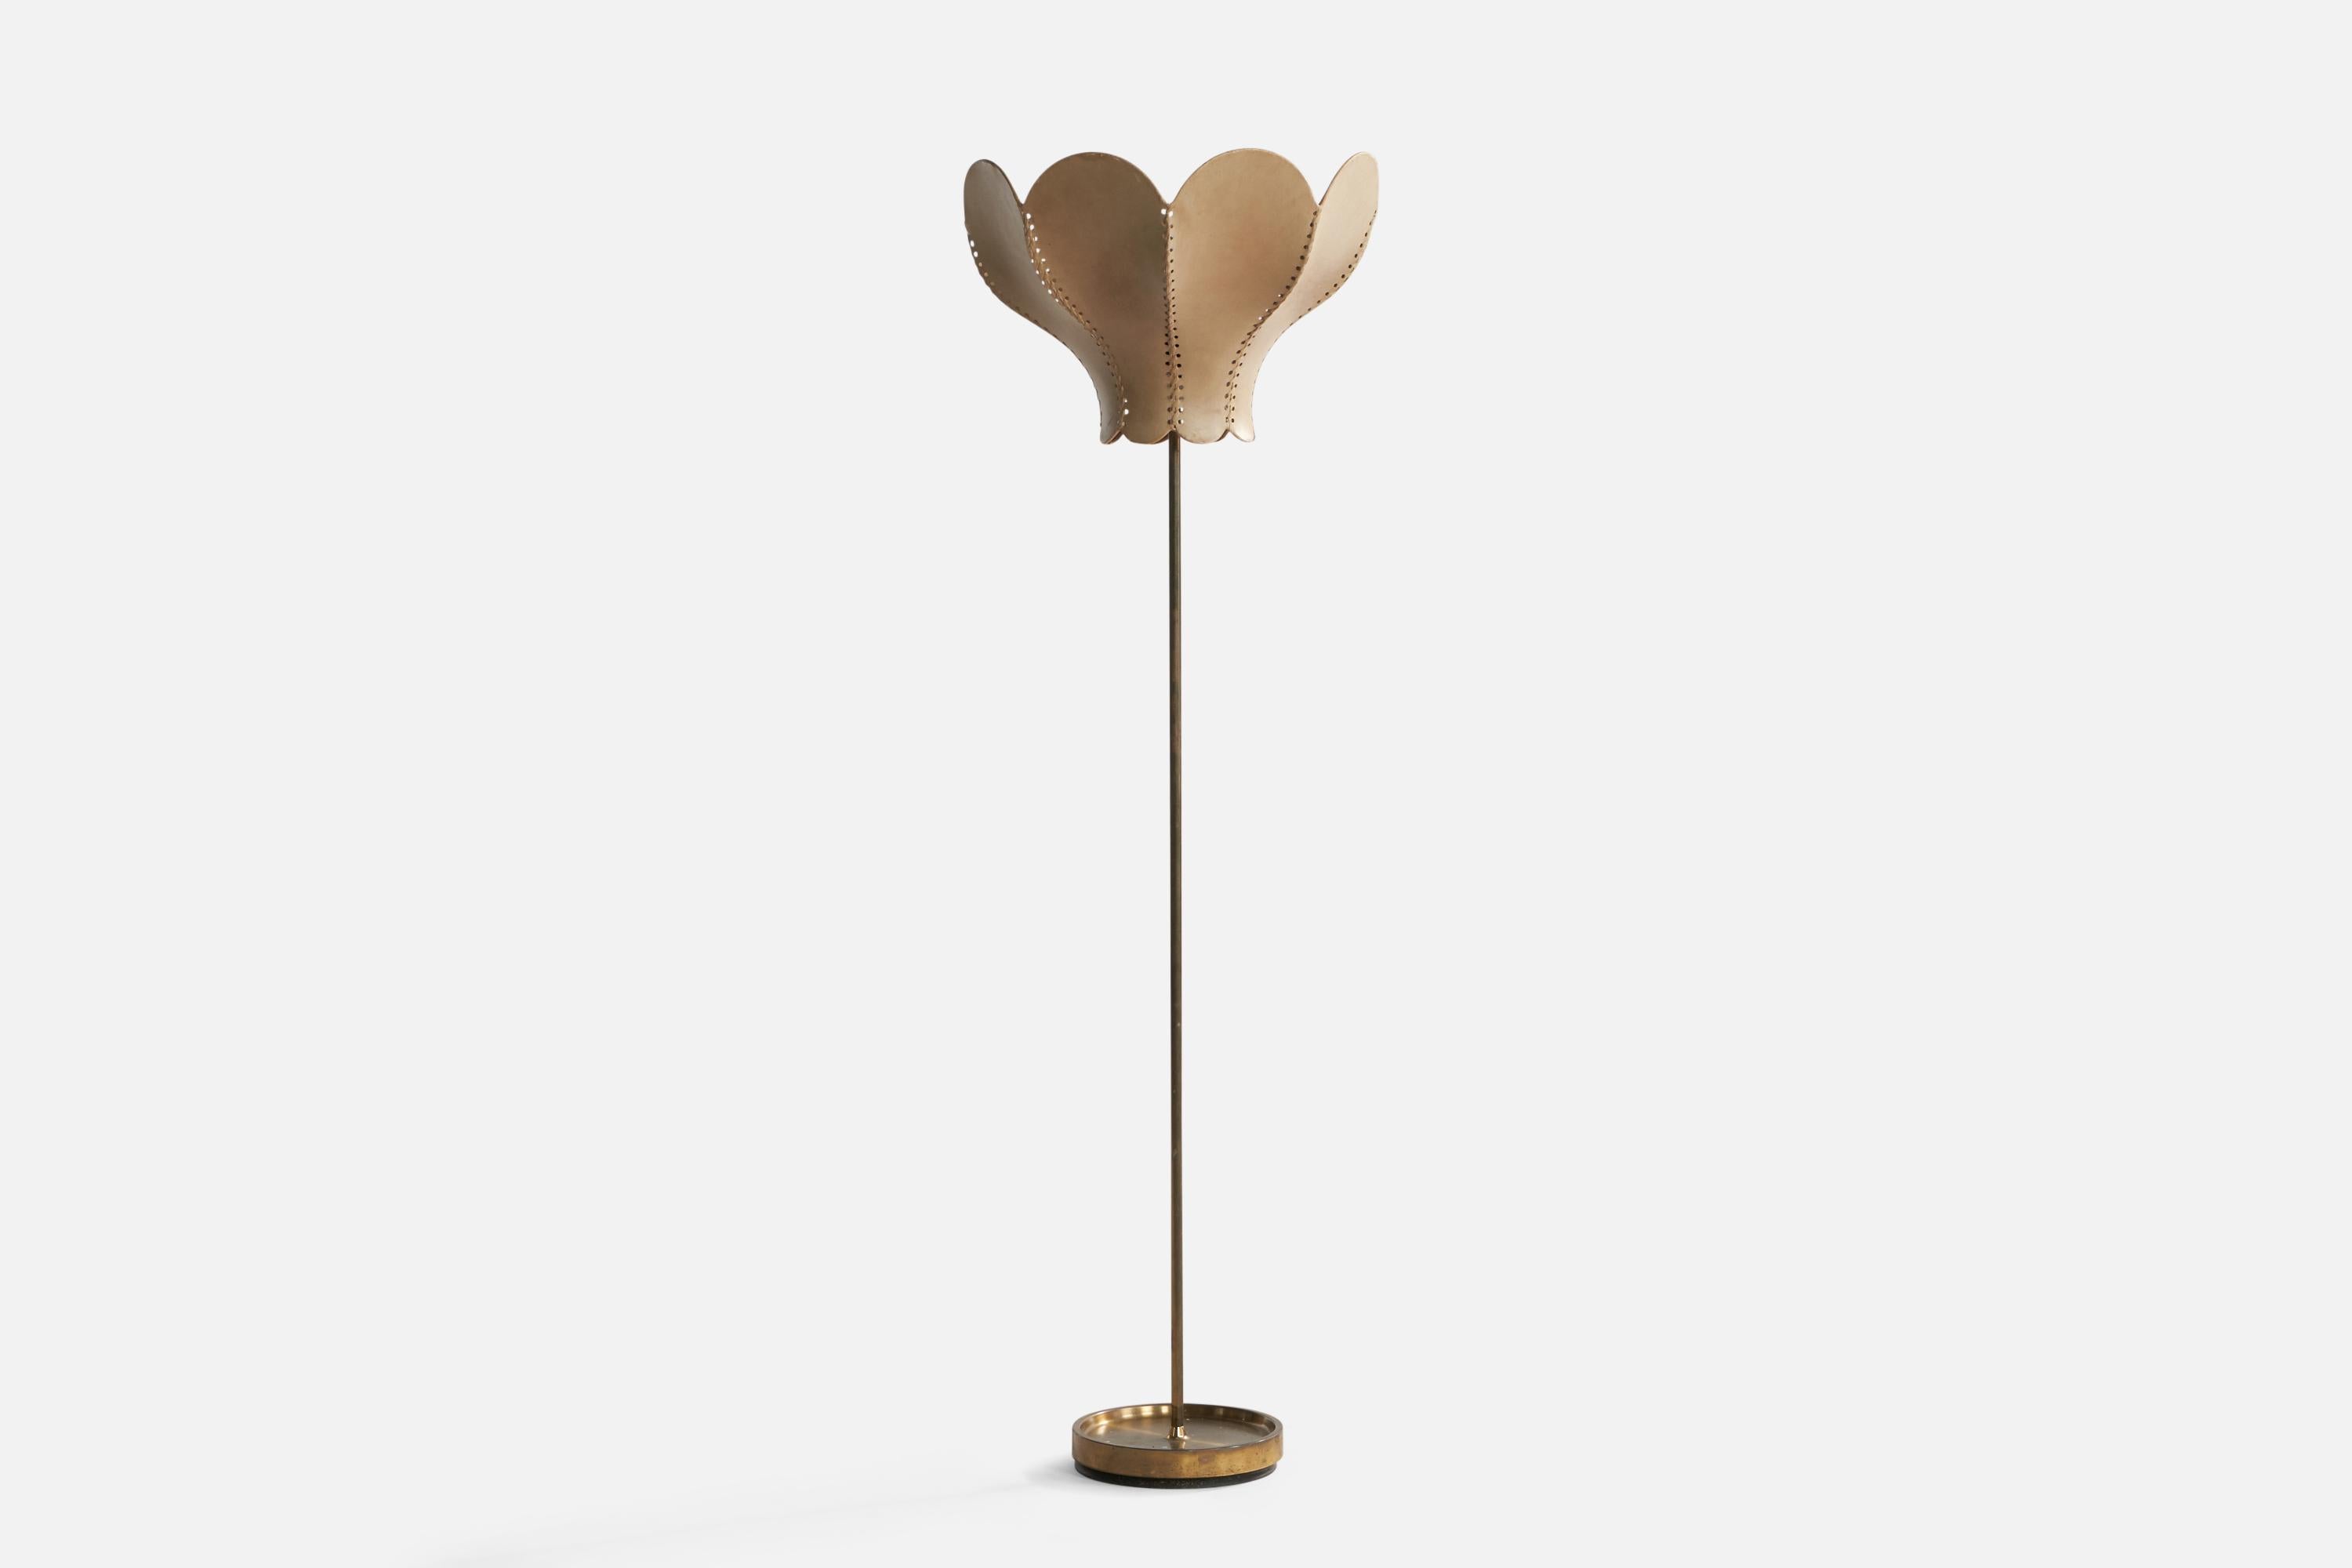 A brass and beige leather floor lamp designed and produced by Fagerhults Belysning, Sweden, 1960s.

Overall Dimensions (inches): 60.35” H x 18.5” Diameter. Stated dimensions include shade.
Bulb Specifications: E-26 Bulb
Number of Sockets: 1
All